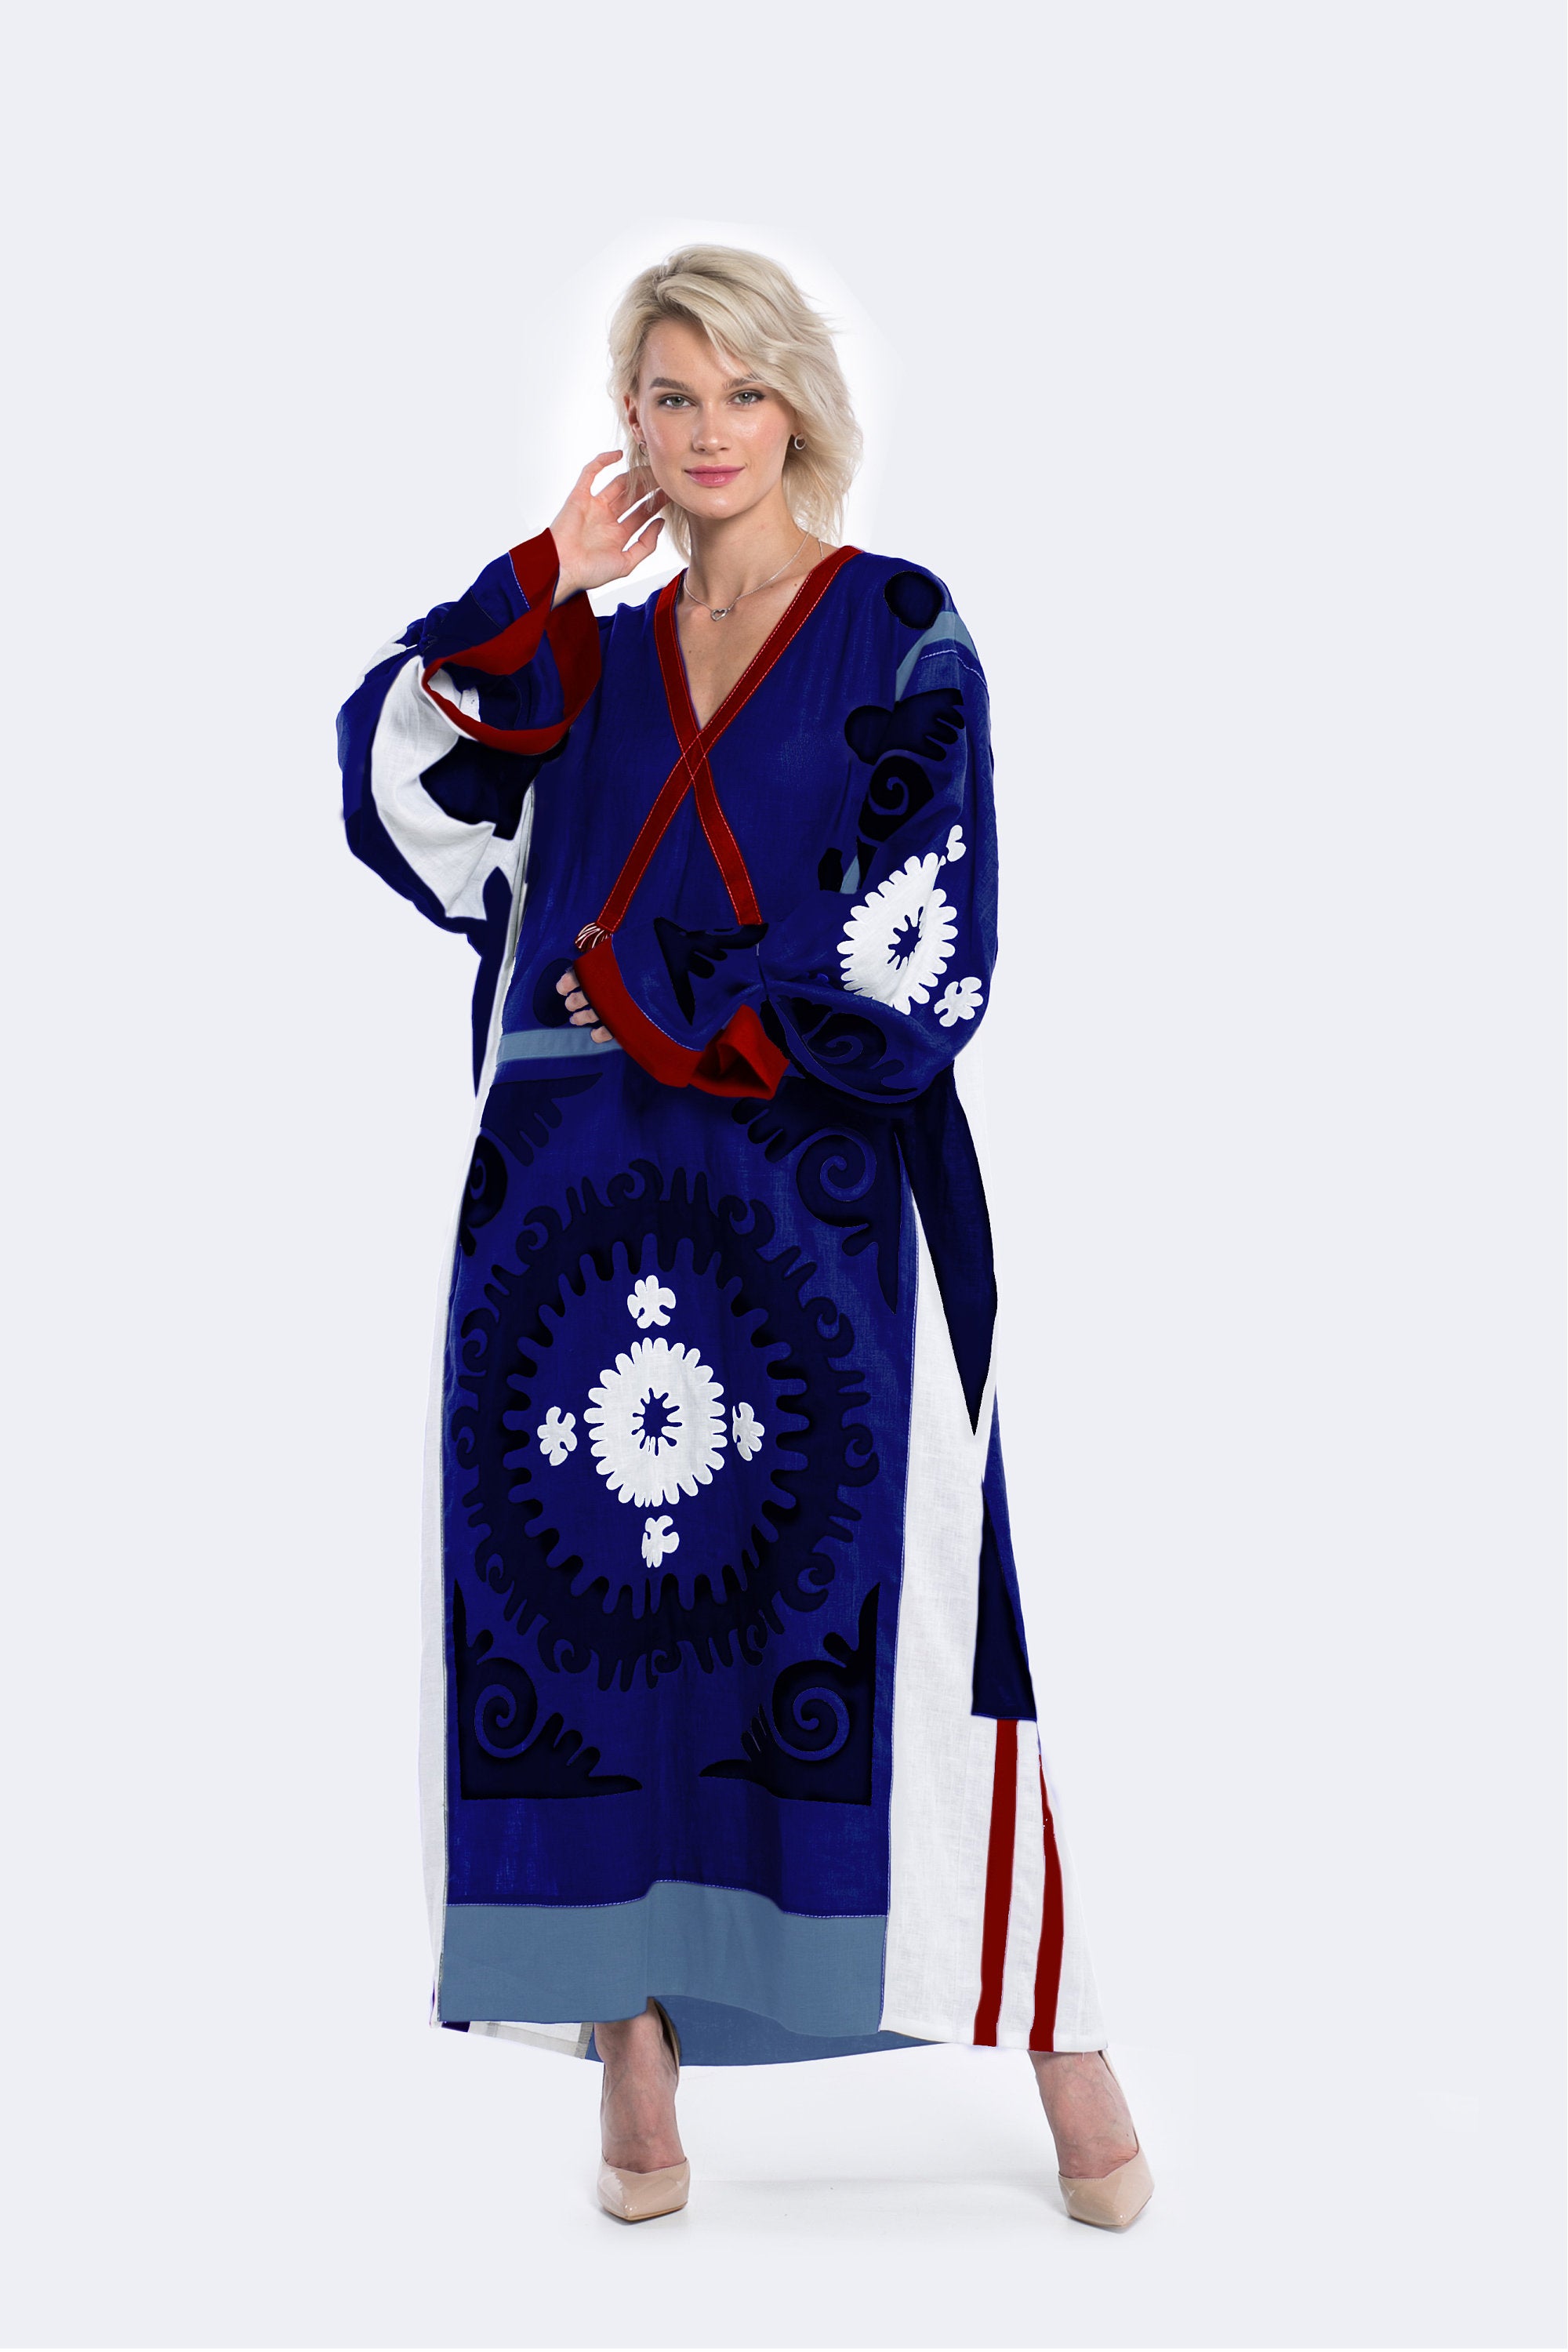 Negroni embroidered dress Oversized kaftan with ethnic applique embroidery